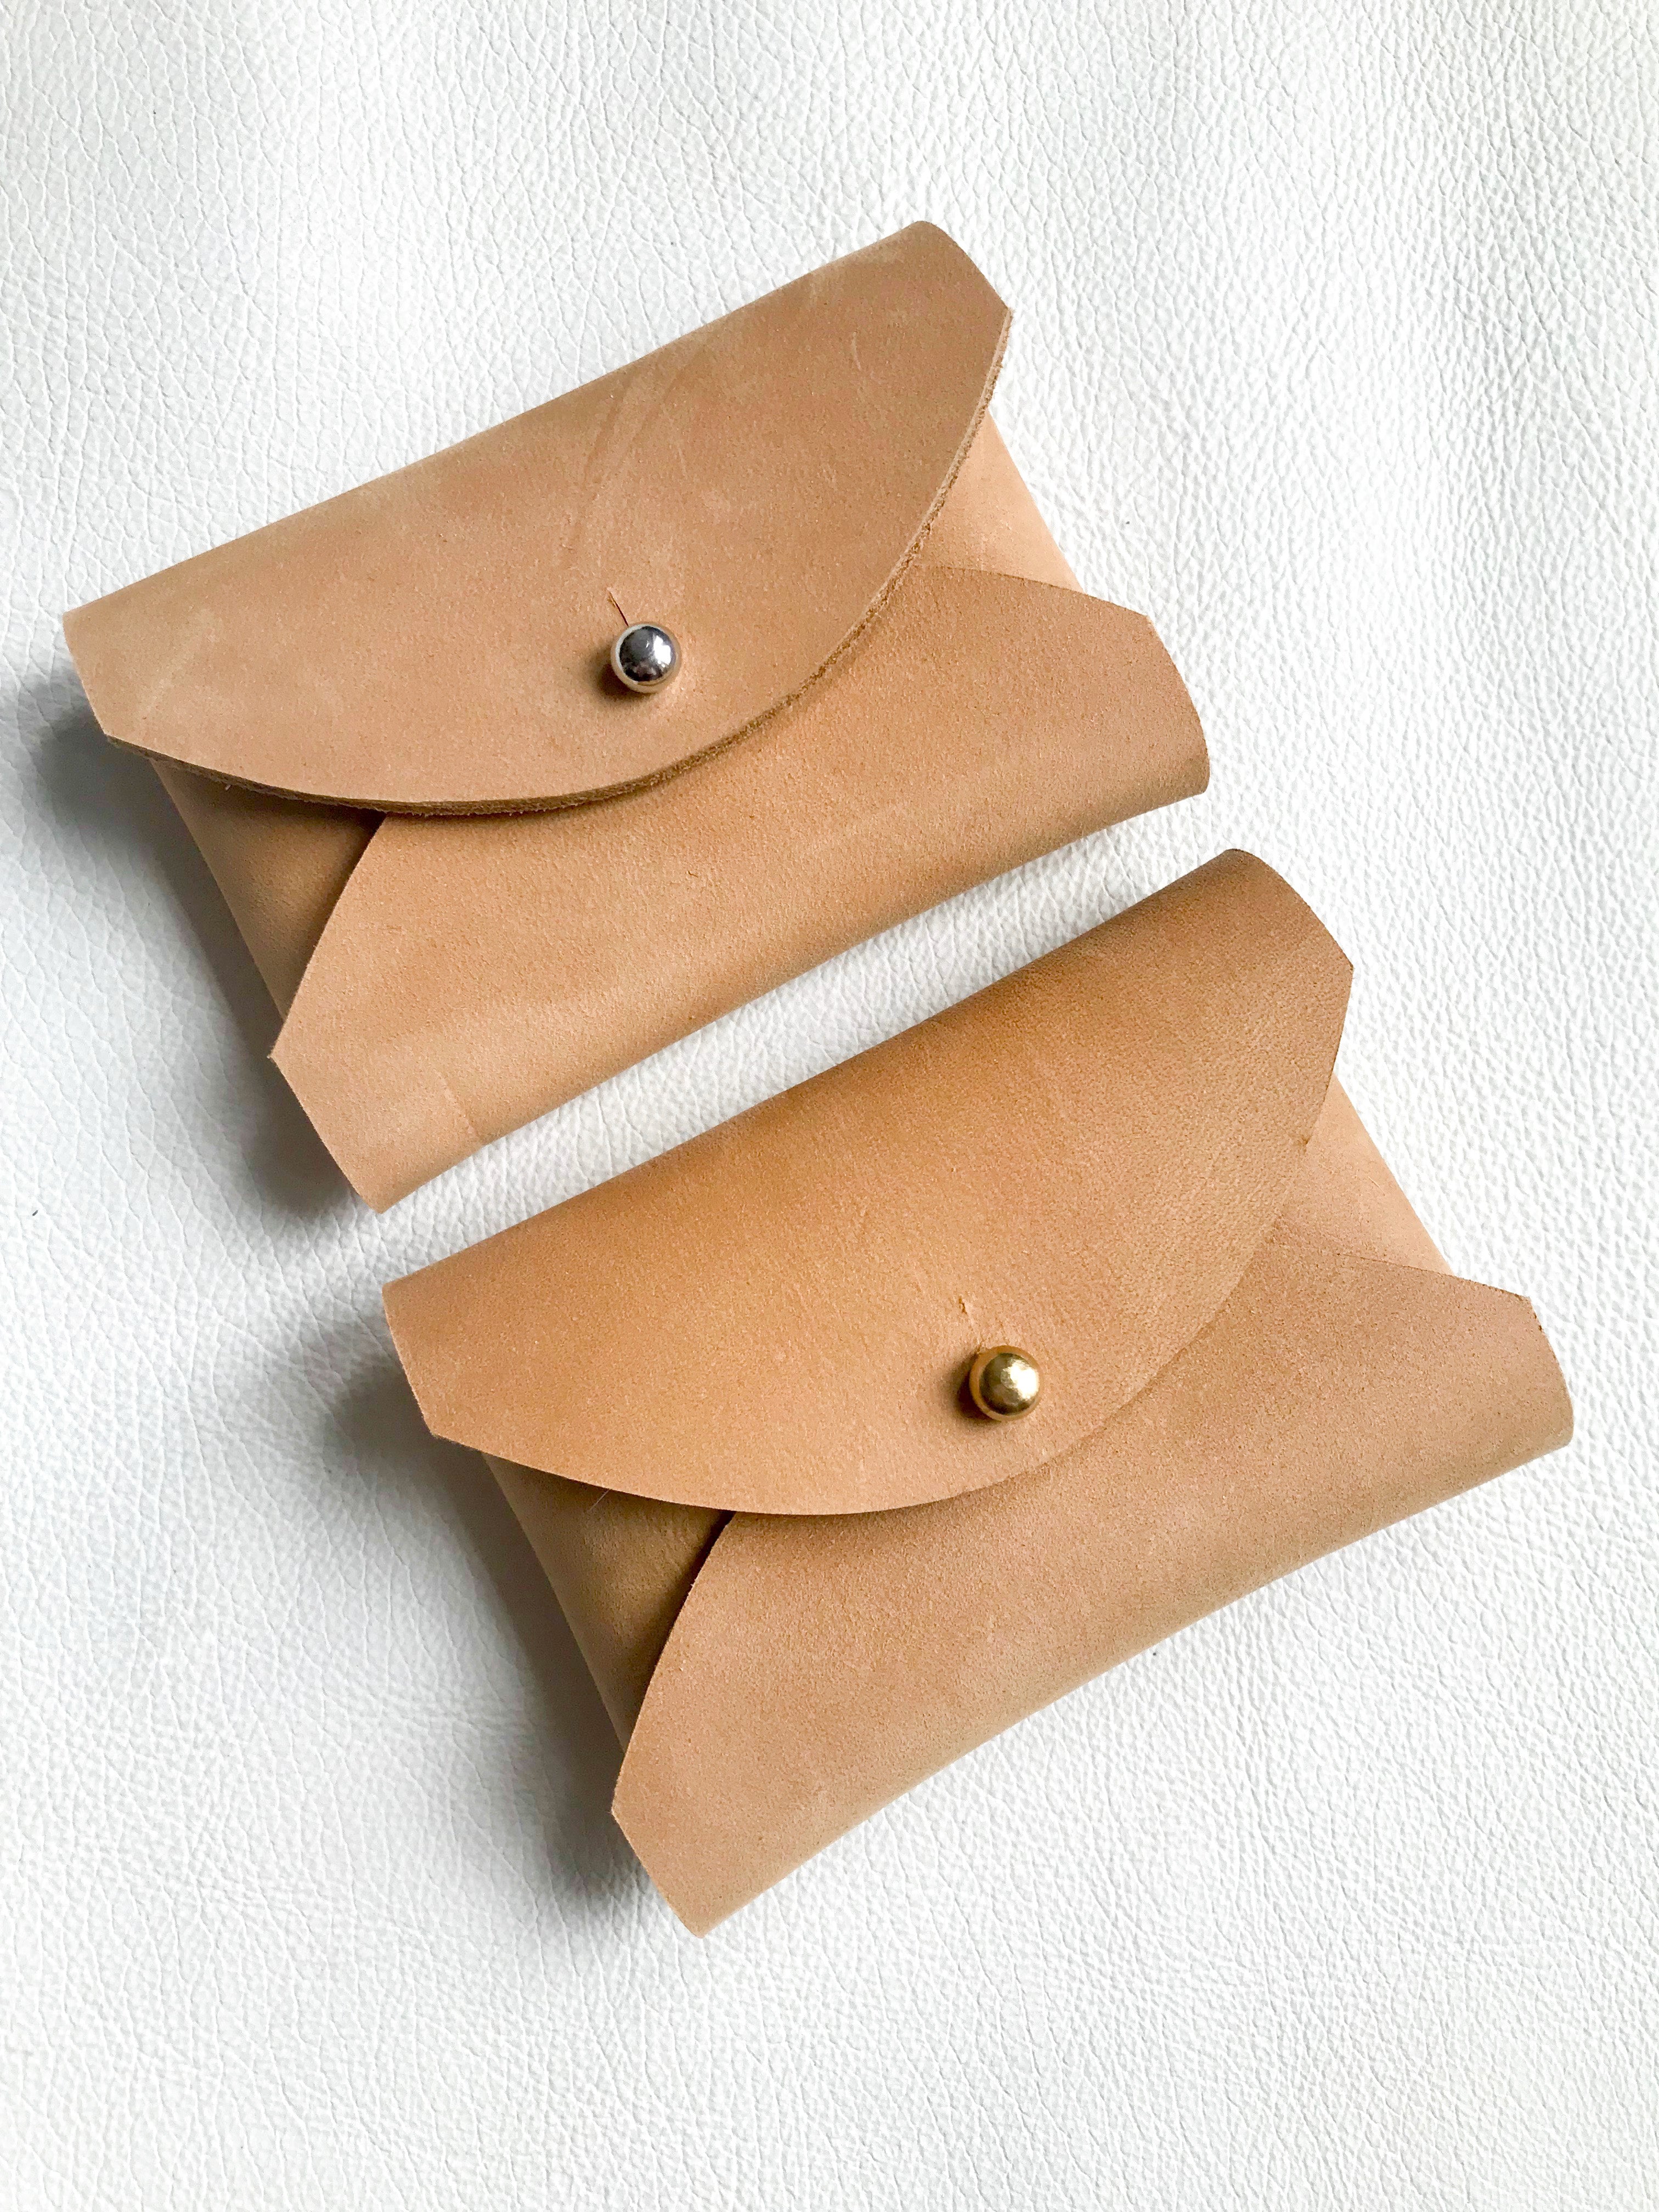 How to Make a Leather Envelope Wallet